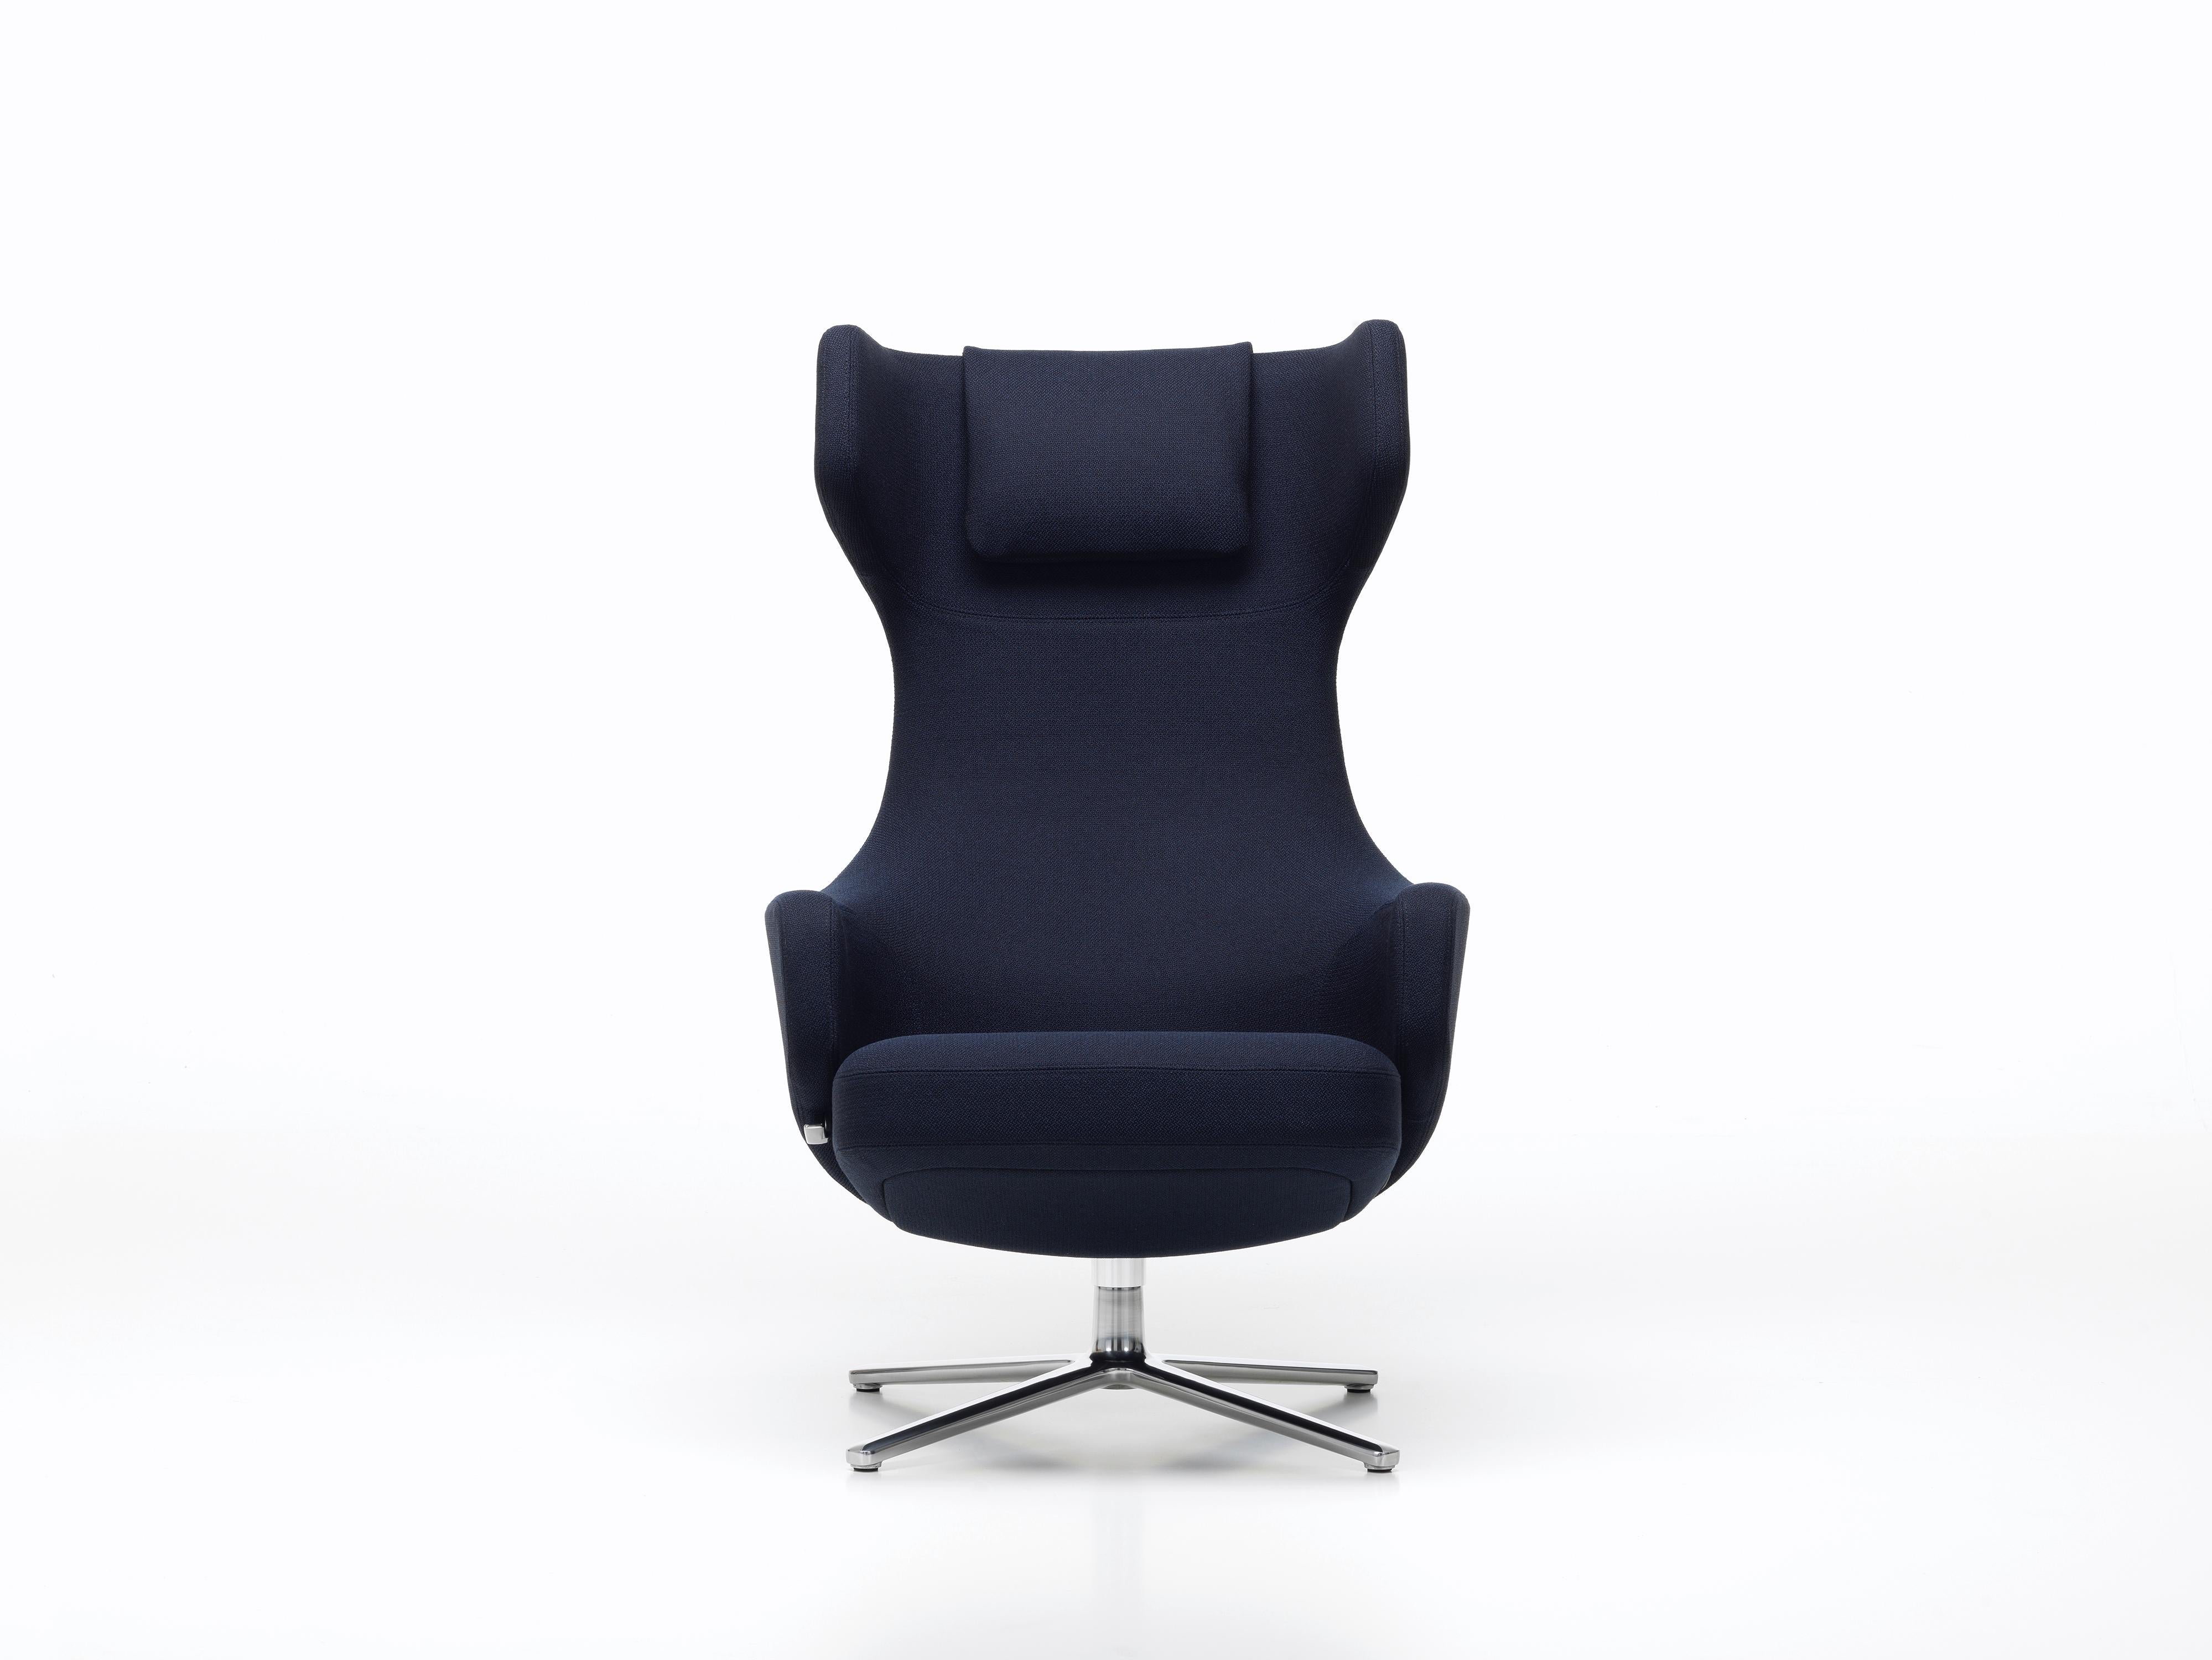 These items are currently only available in the United States.

A synchronized mechanism concealed beneath the upholstery of the Grand Repos wing chair ensures continual back support at every angle of inclination and can be locked in position. This